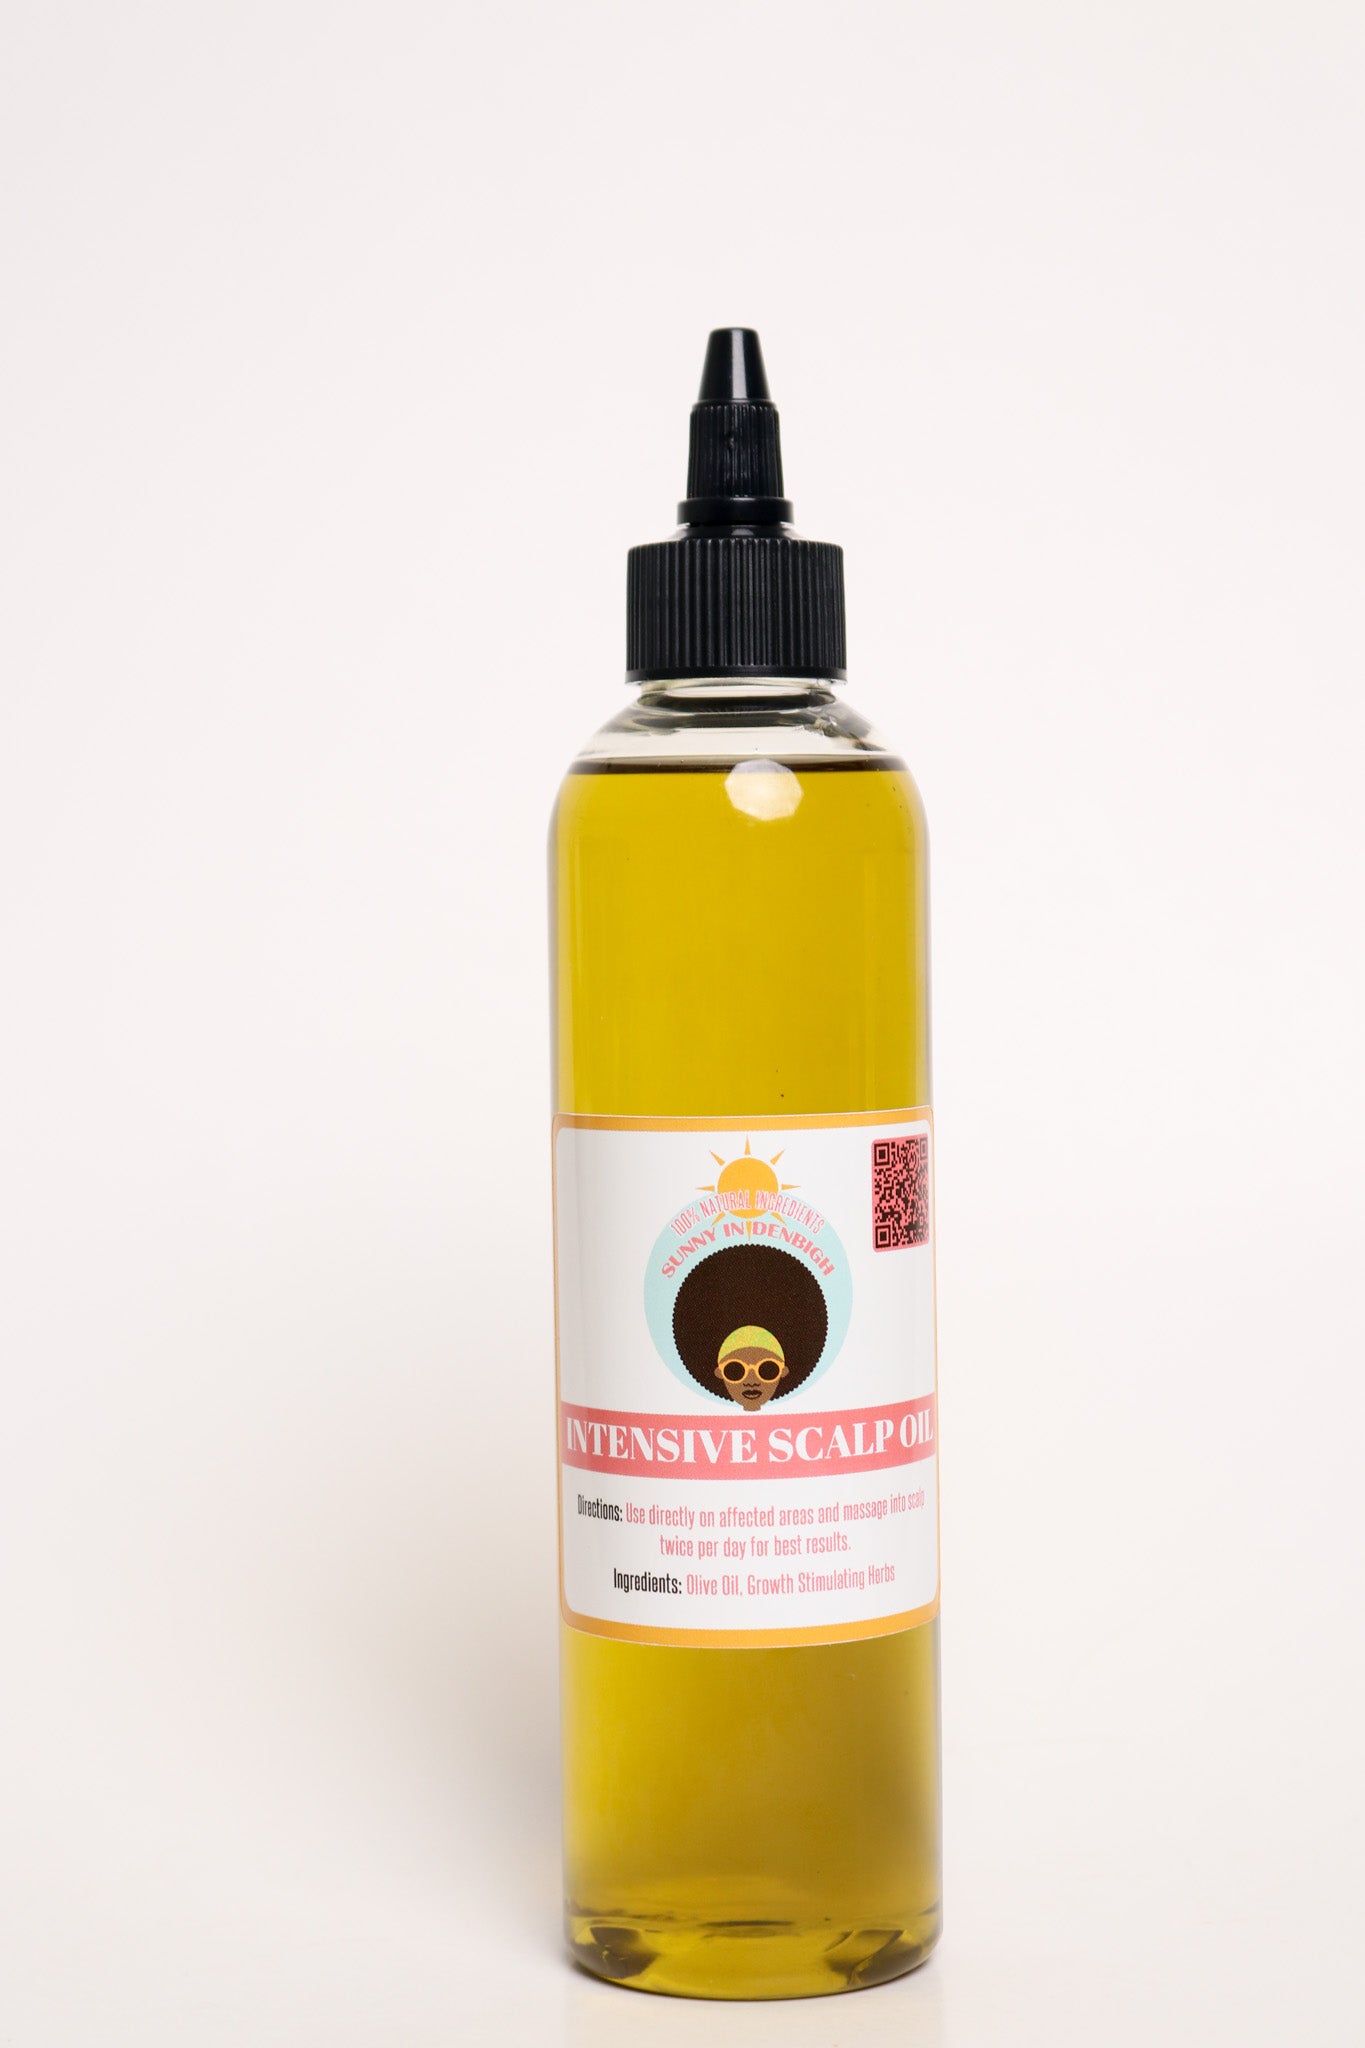 Sunny In Denbigh’s Intensive Scalp Oil Contains 8 different herbs, uniquely selected to promote and stimulate intense hair growth. These herbs are also effective DHT (Dihydrotestosterone) blockers, which helps with male pattern baldness .